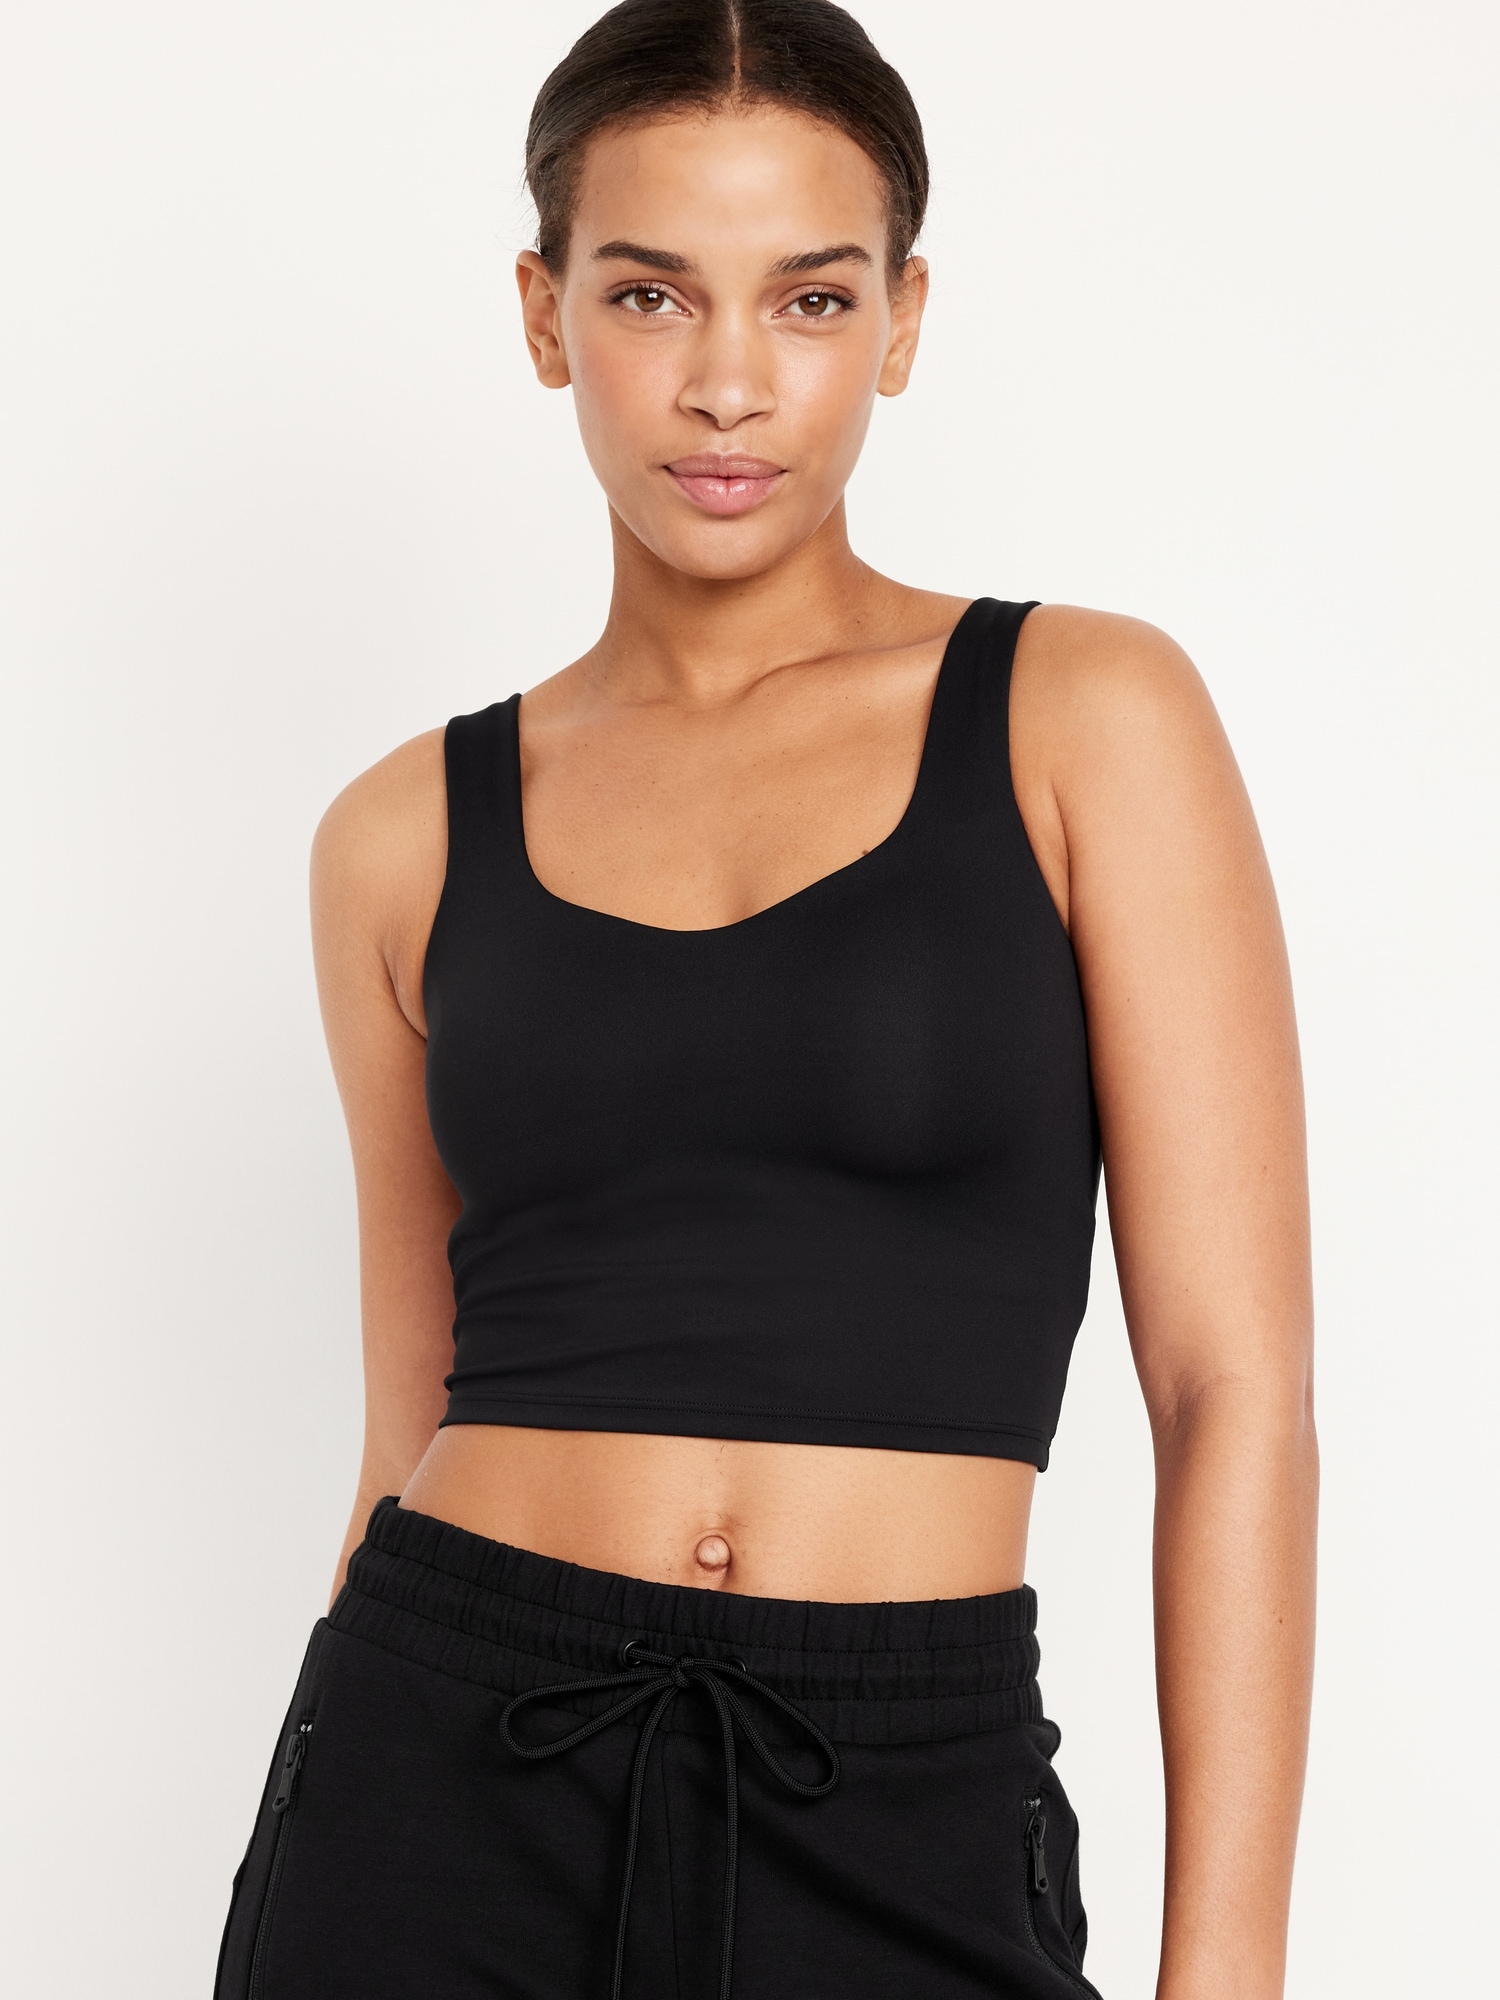  Molded Cup Sports Bra